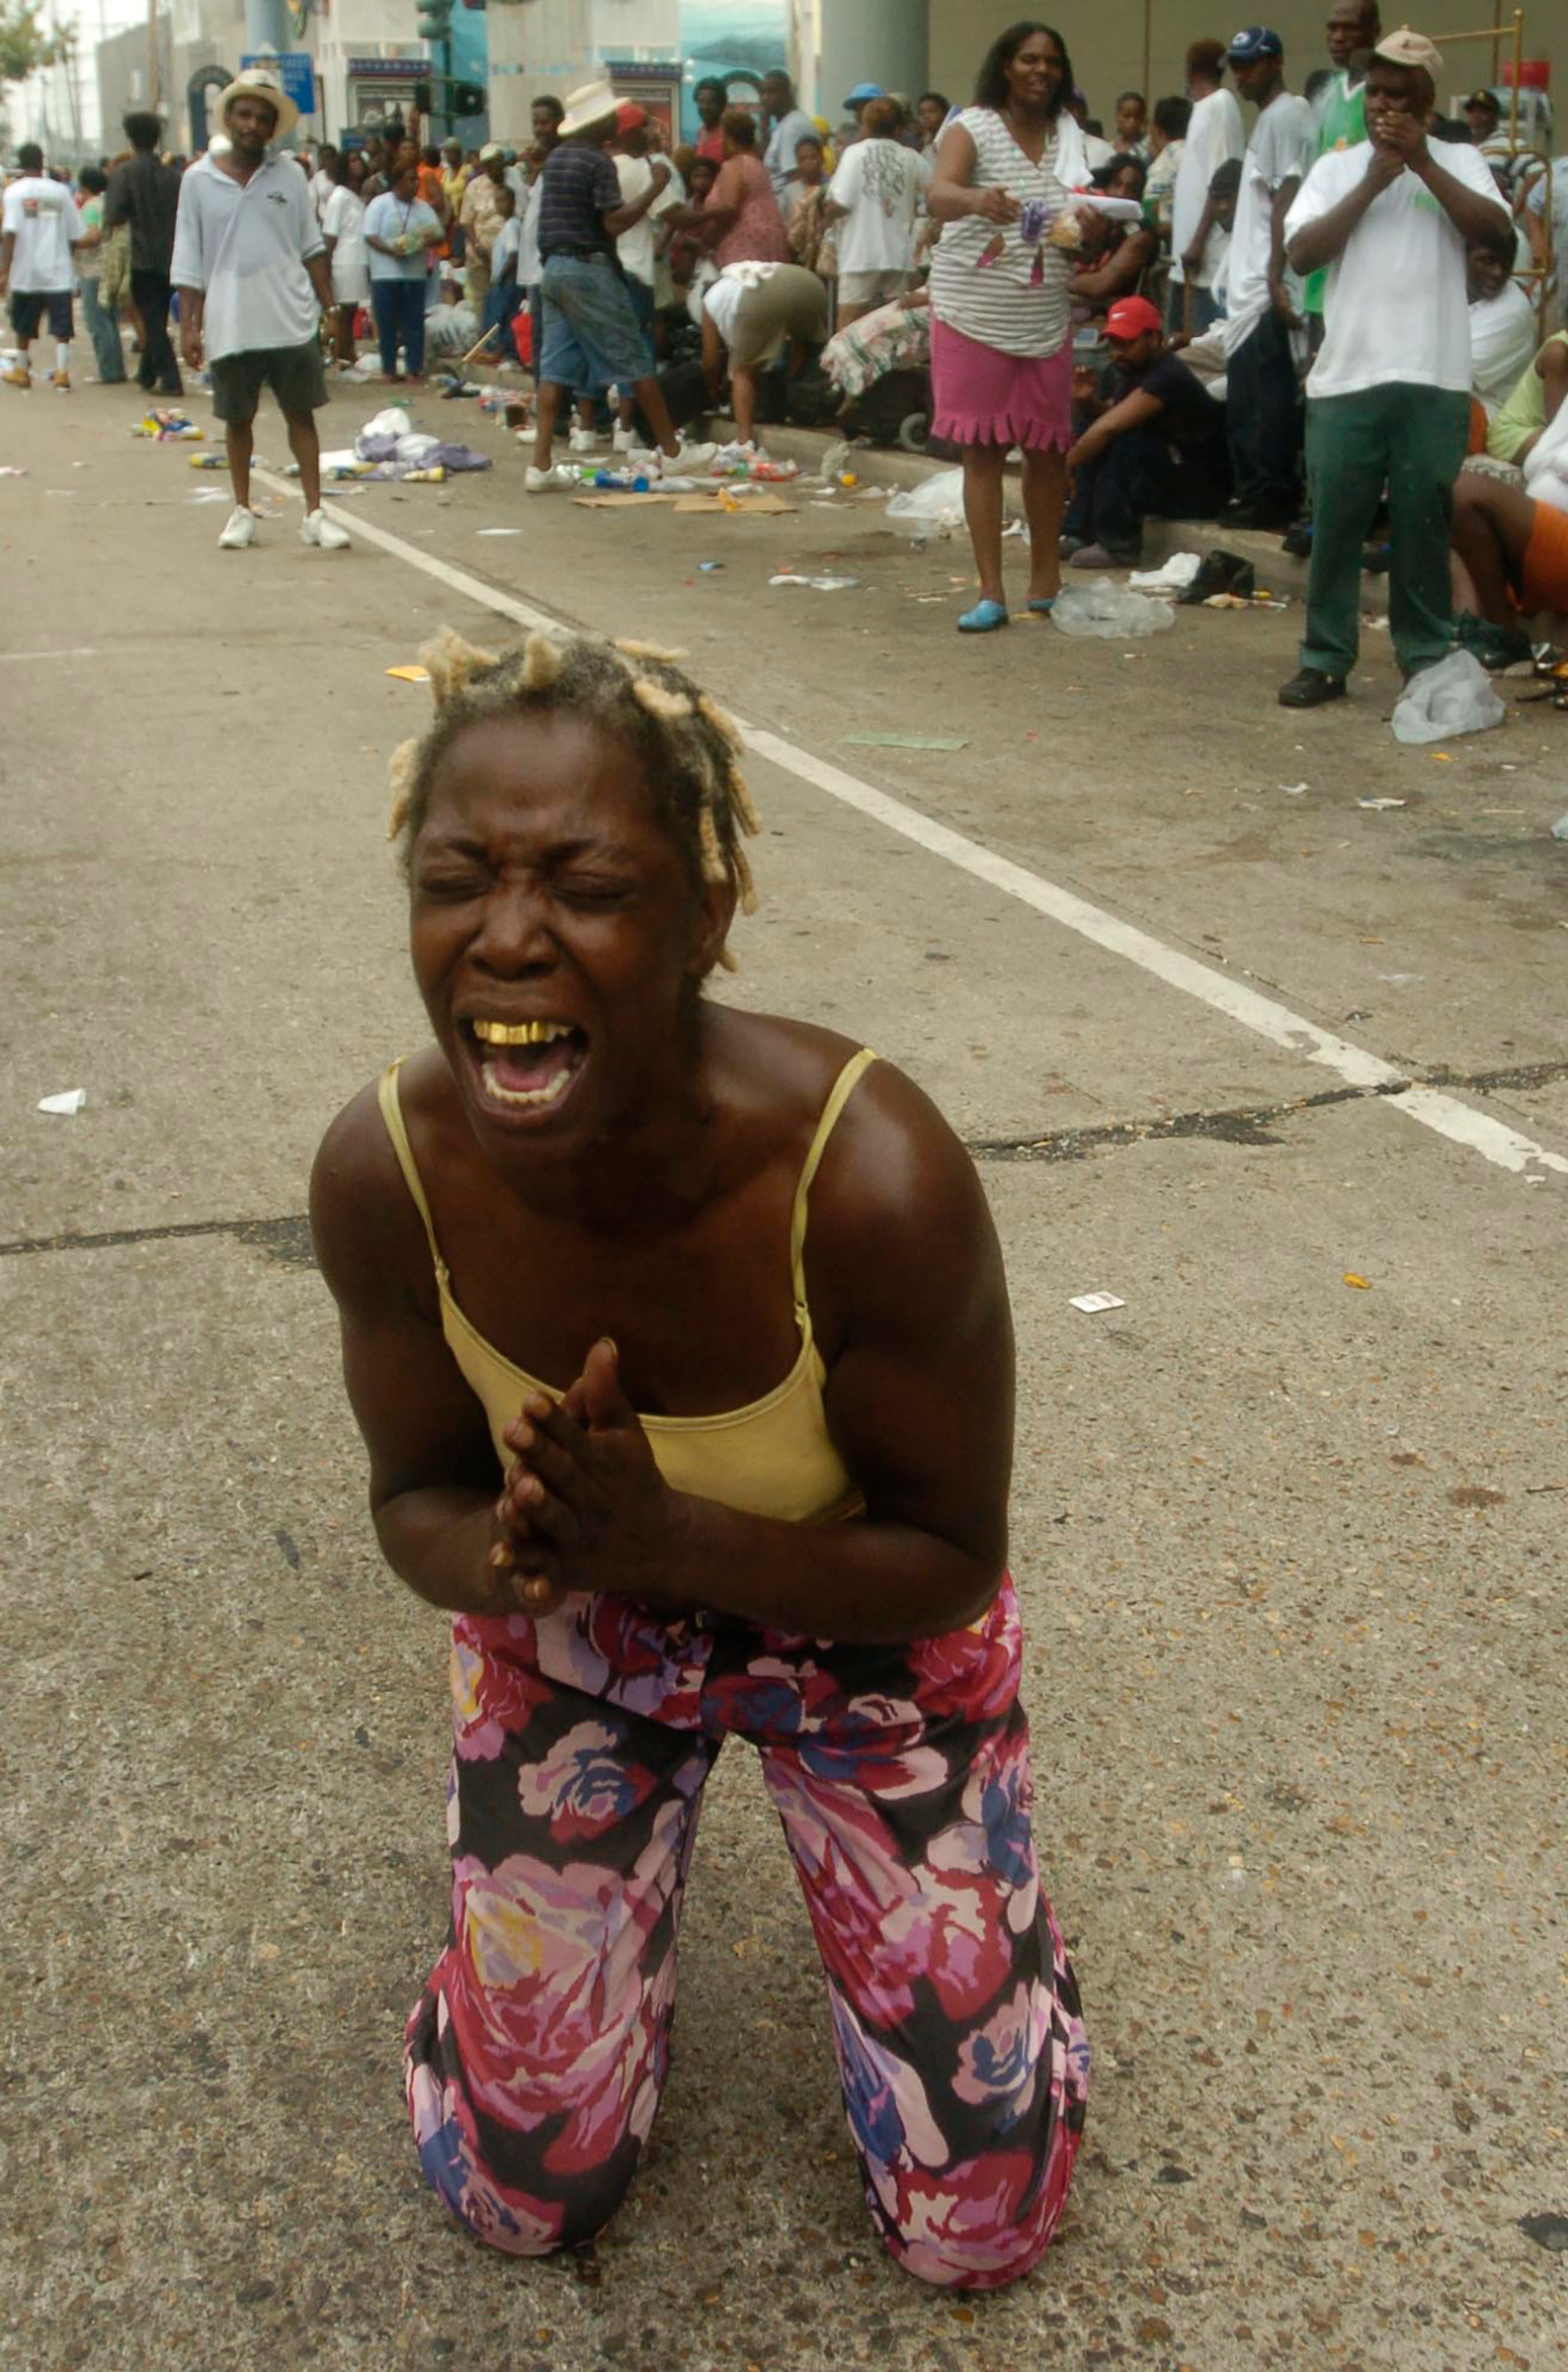 Angela Perkins drops to her knees asking for help among thousands of people gathered at the New Orleans Convention Center waiting in the aftermath of Hurricane Katrina on Sept. 1, 2005 (Melissa Phillip—Houston Chronicle/AP)